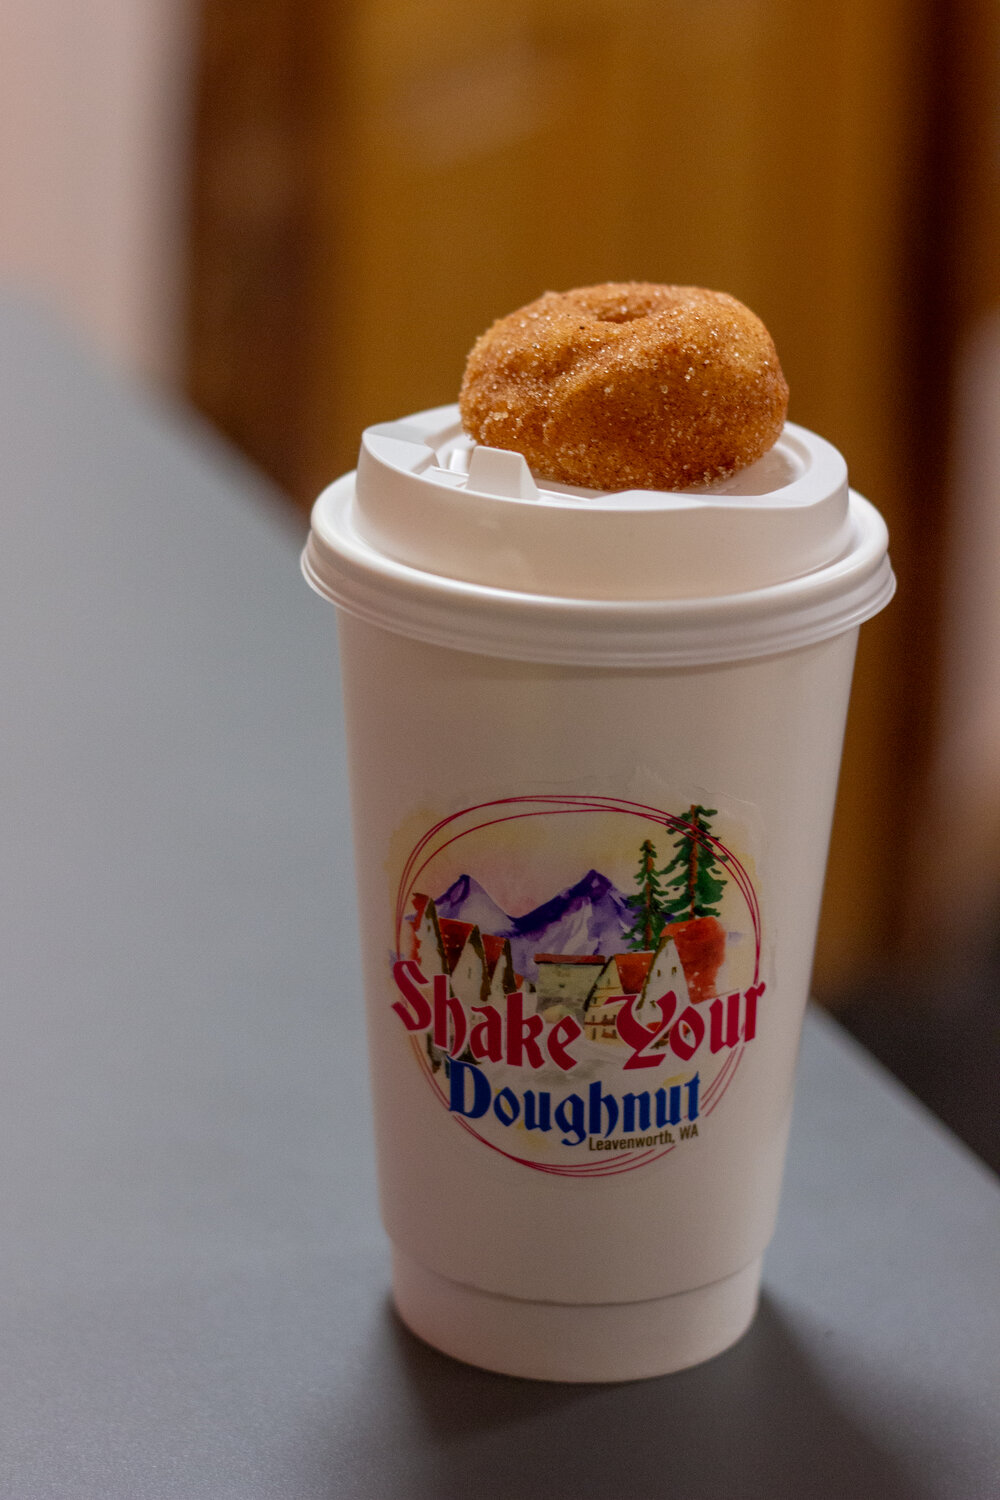 A latte topped with the shop’s original mini-doughnut. Every specialty drink comes with a mini-doughnut on top.